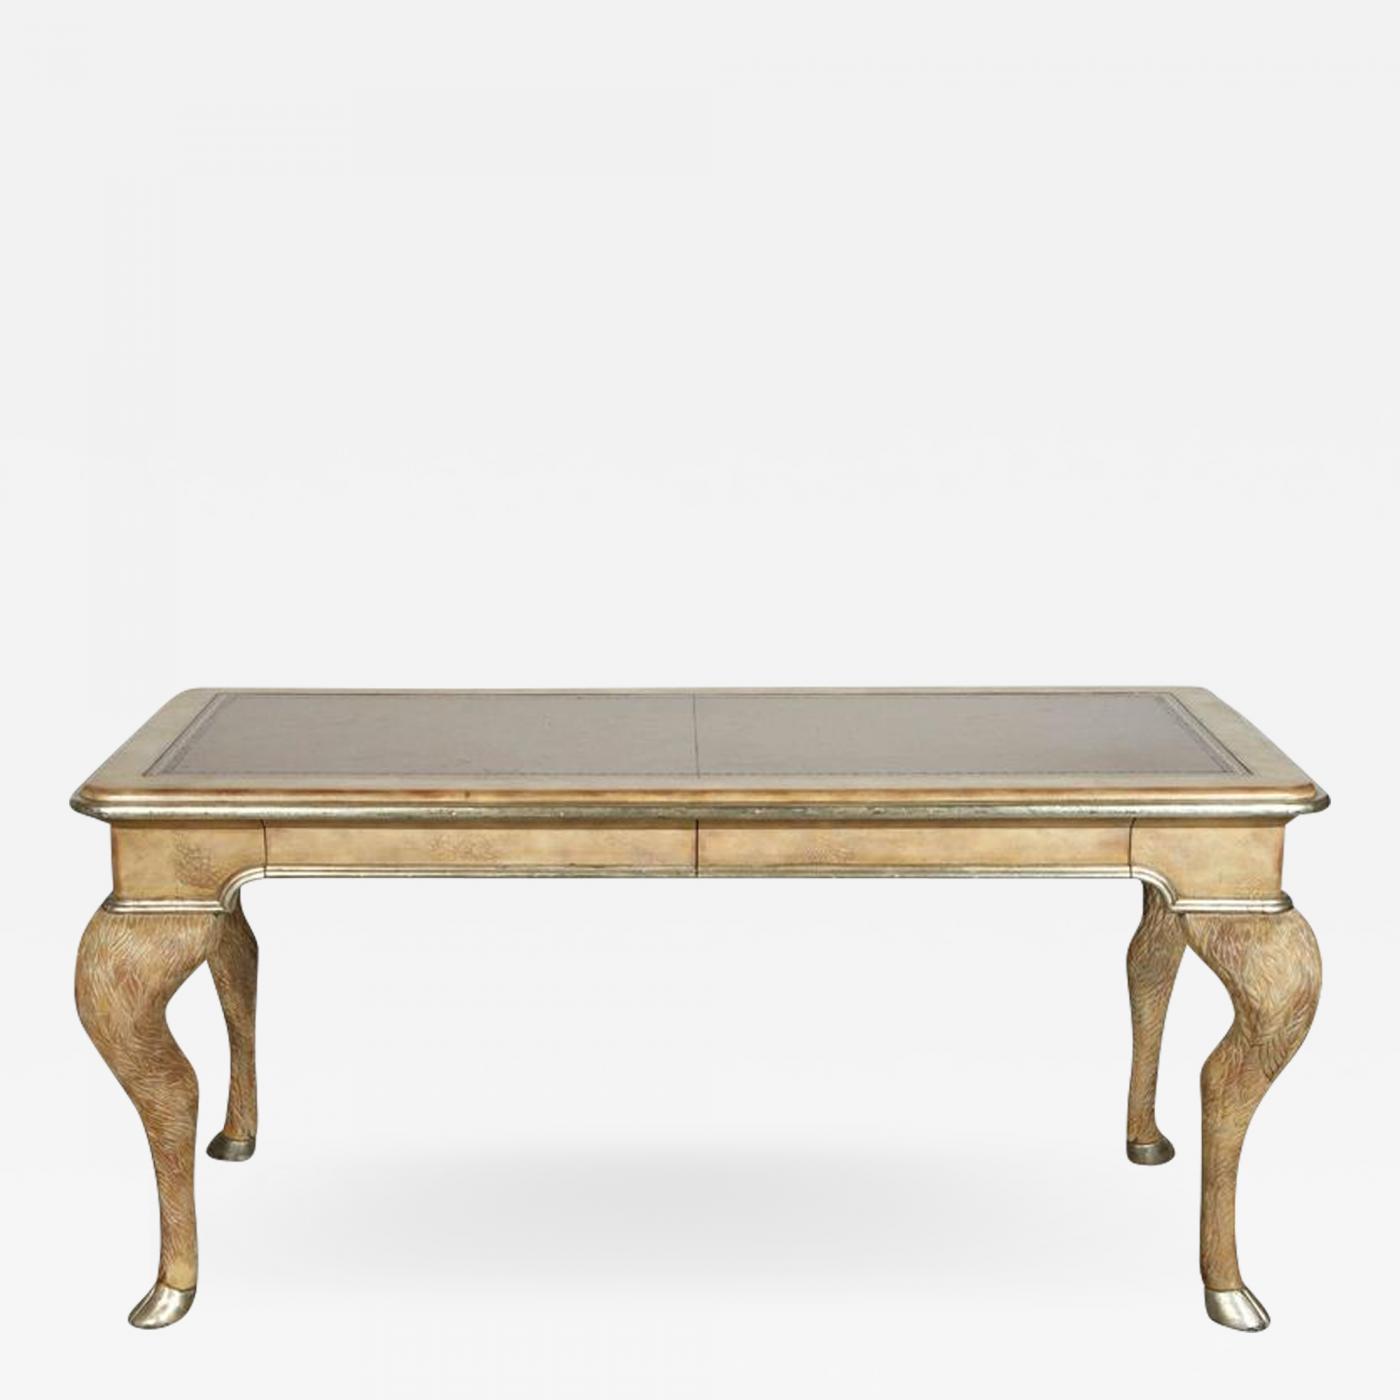 Maitland Smith Opulent Classic Style Desk By Maitland Smith